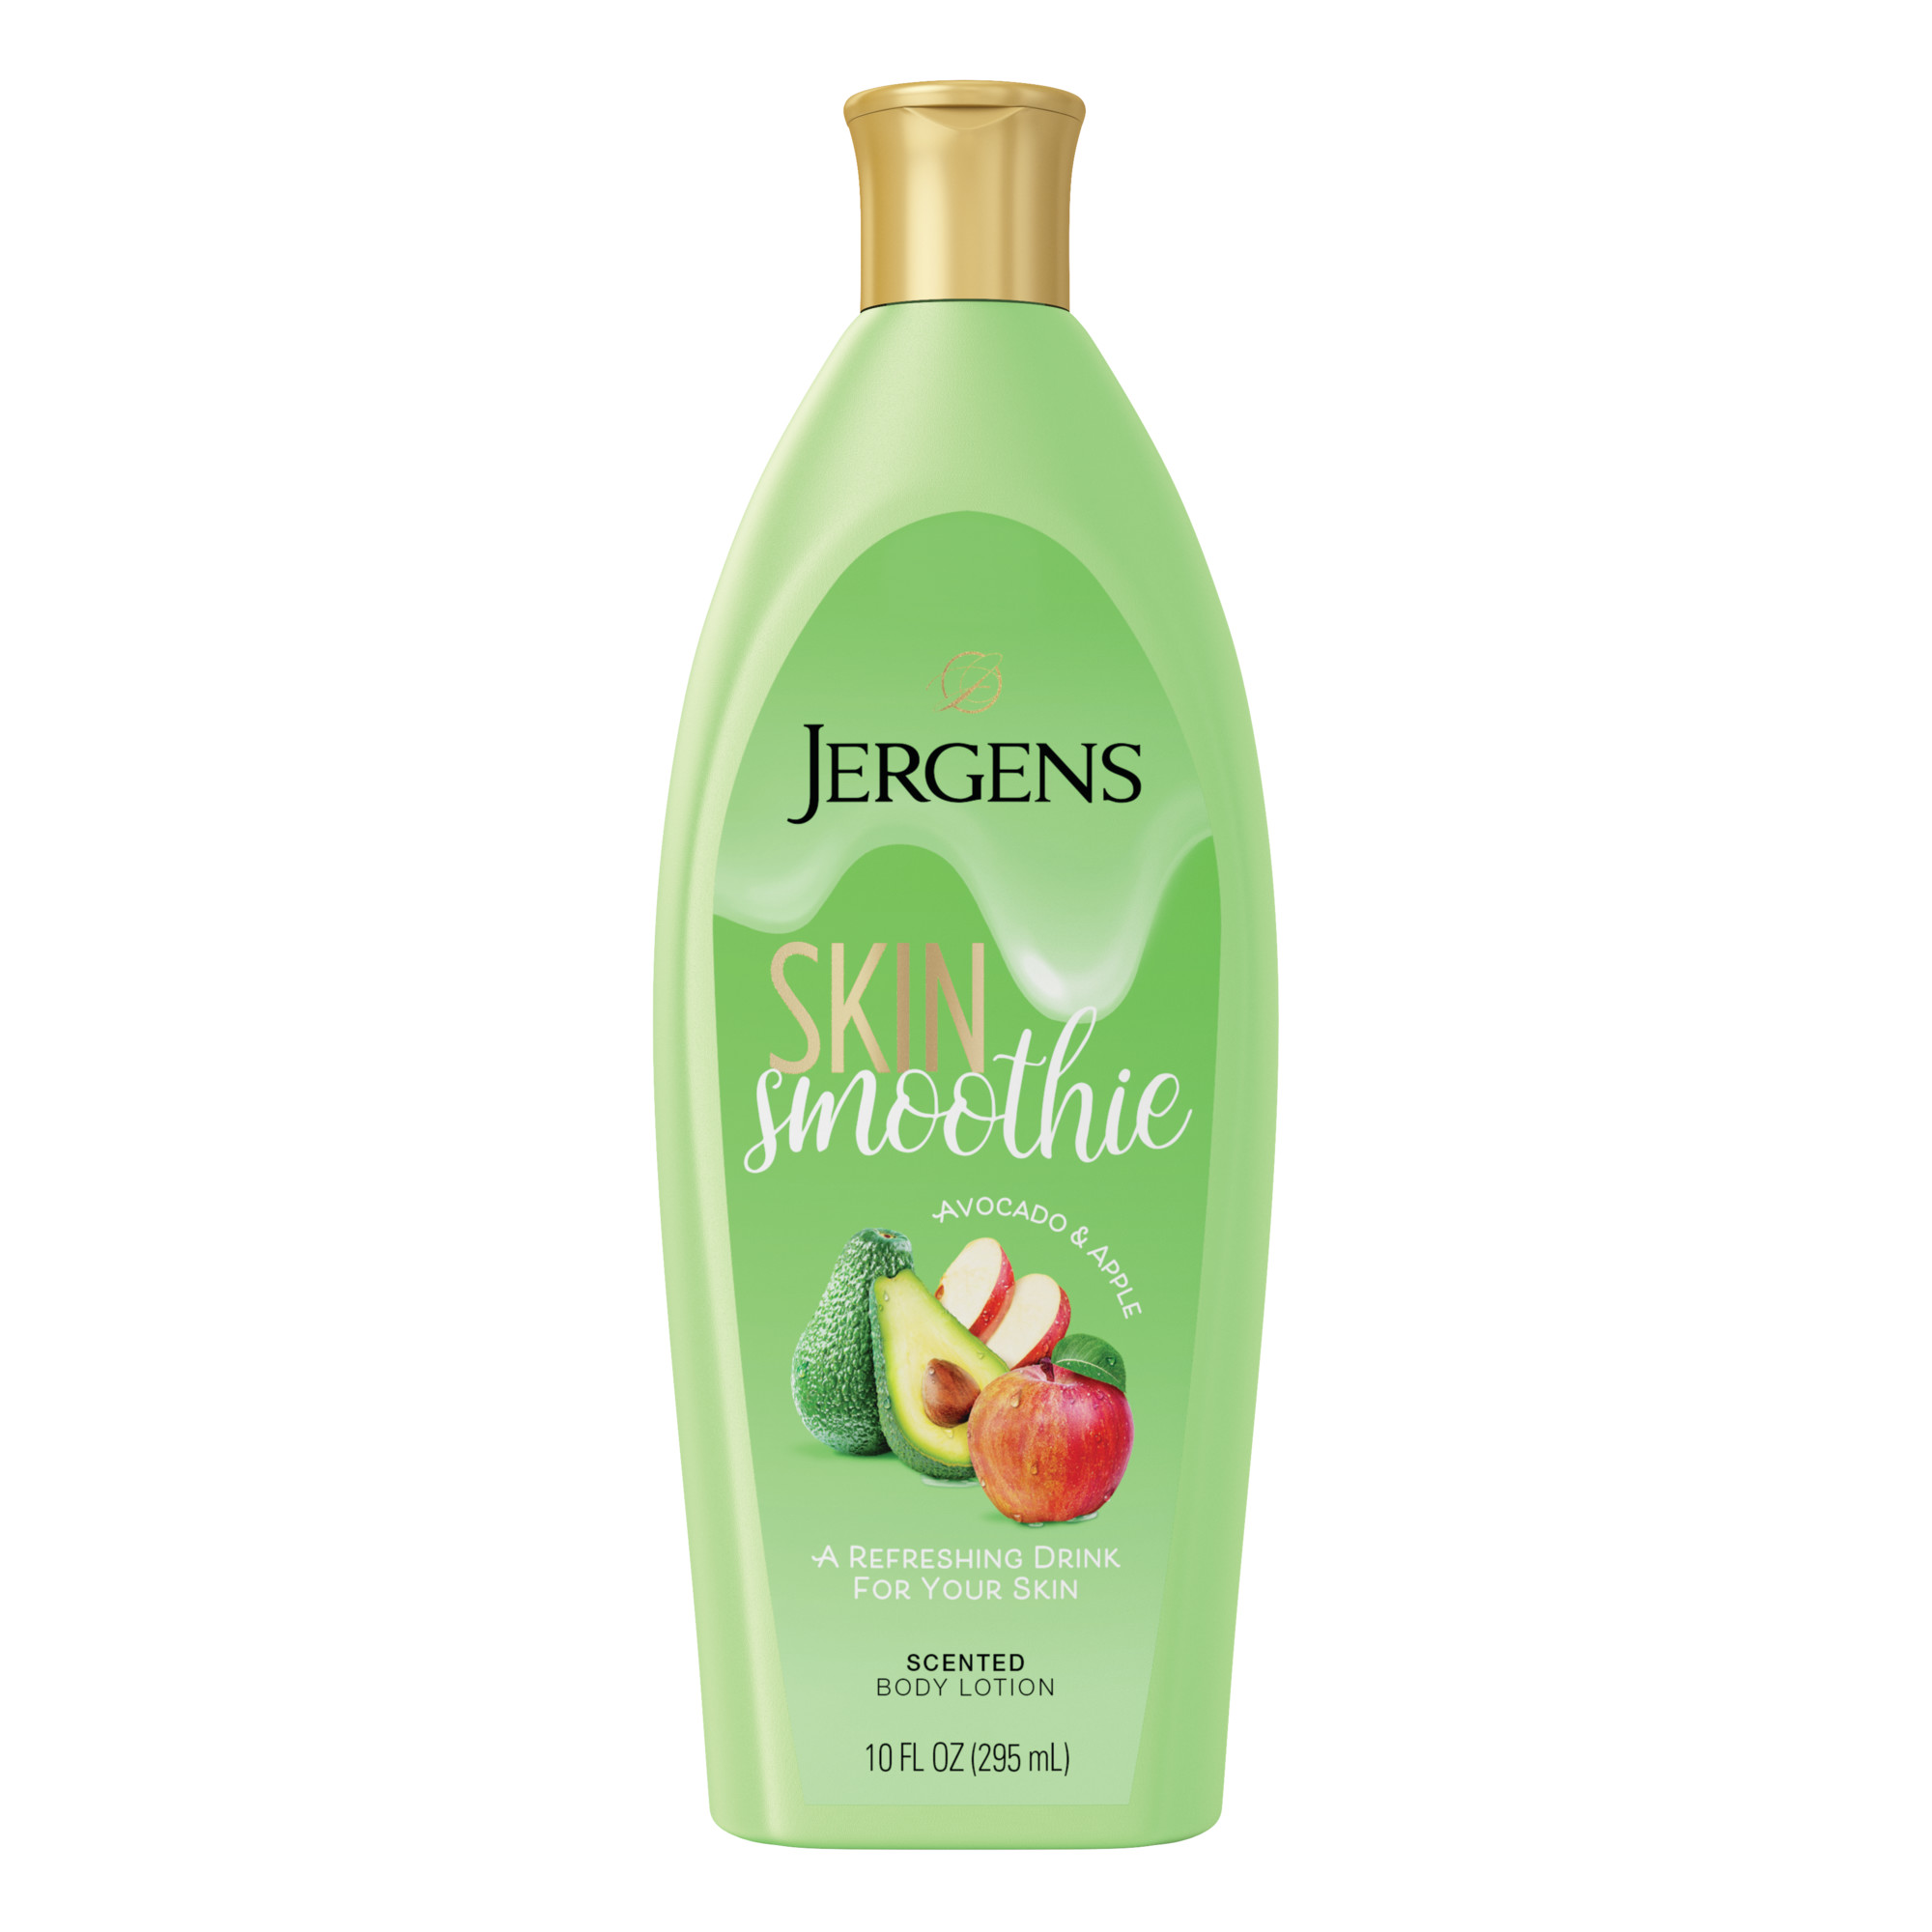 Jergens Skin Smoothie Avocado & Apple Scented Body Lotion, 10 fl oz - image 1 of 11